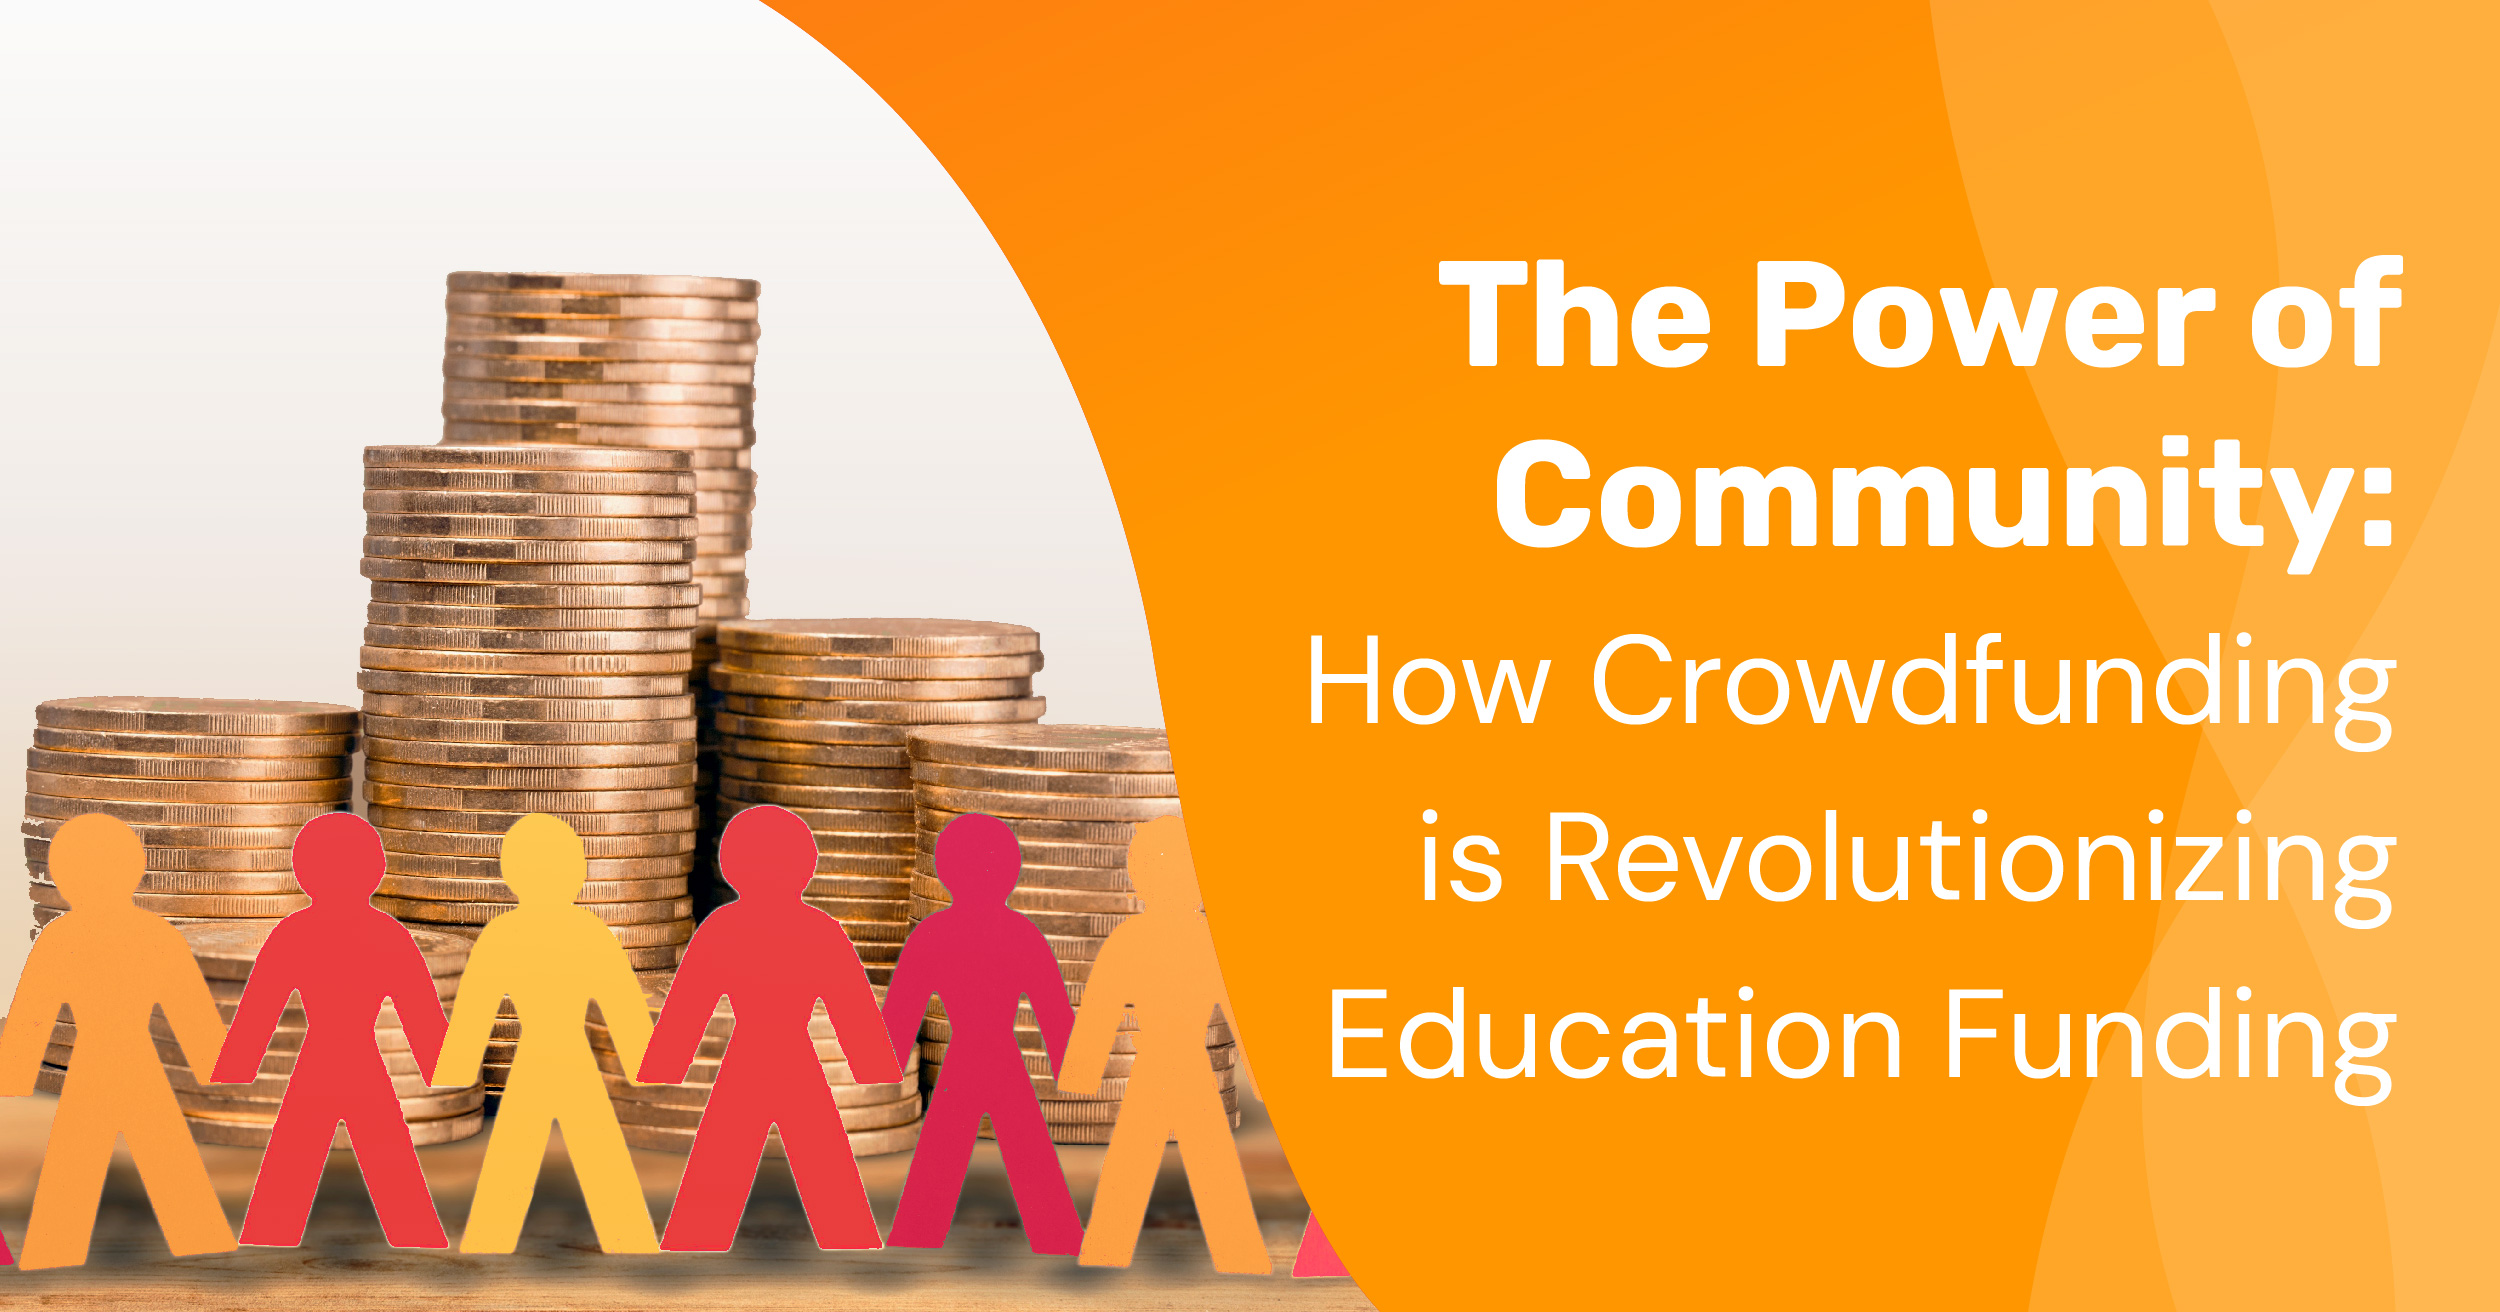 The Power of Community: How Crowdfunding is Revolutionizing Education Funding